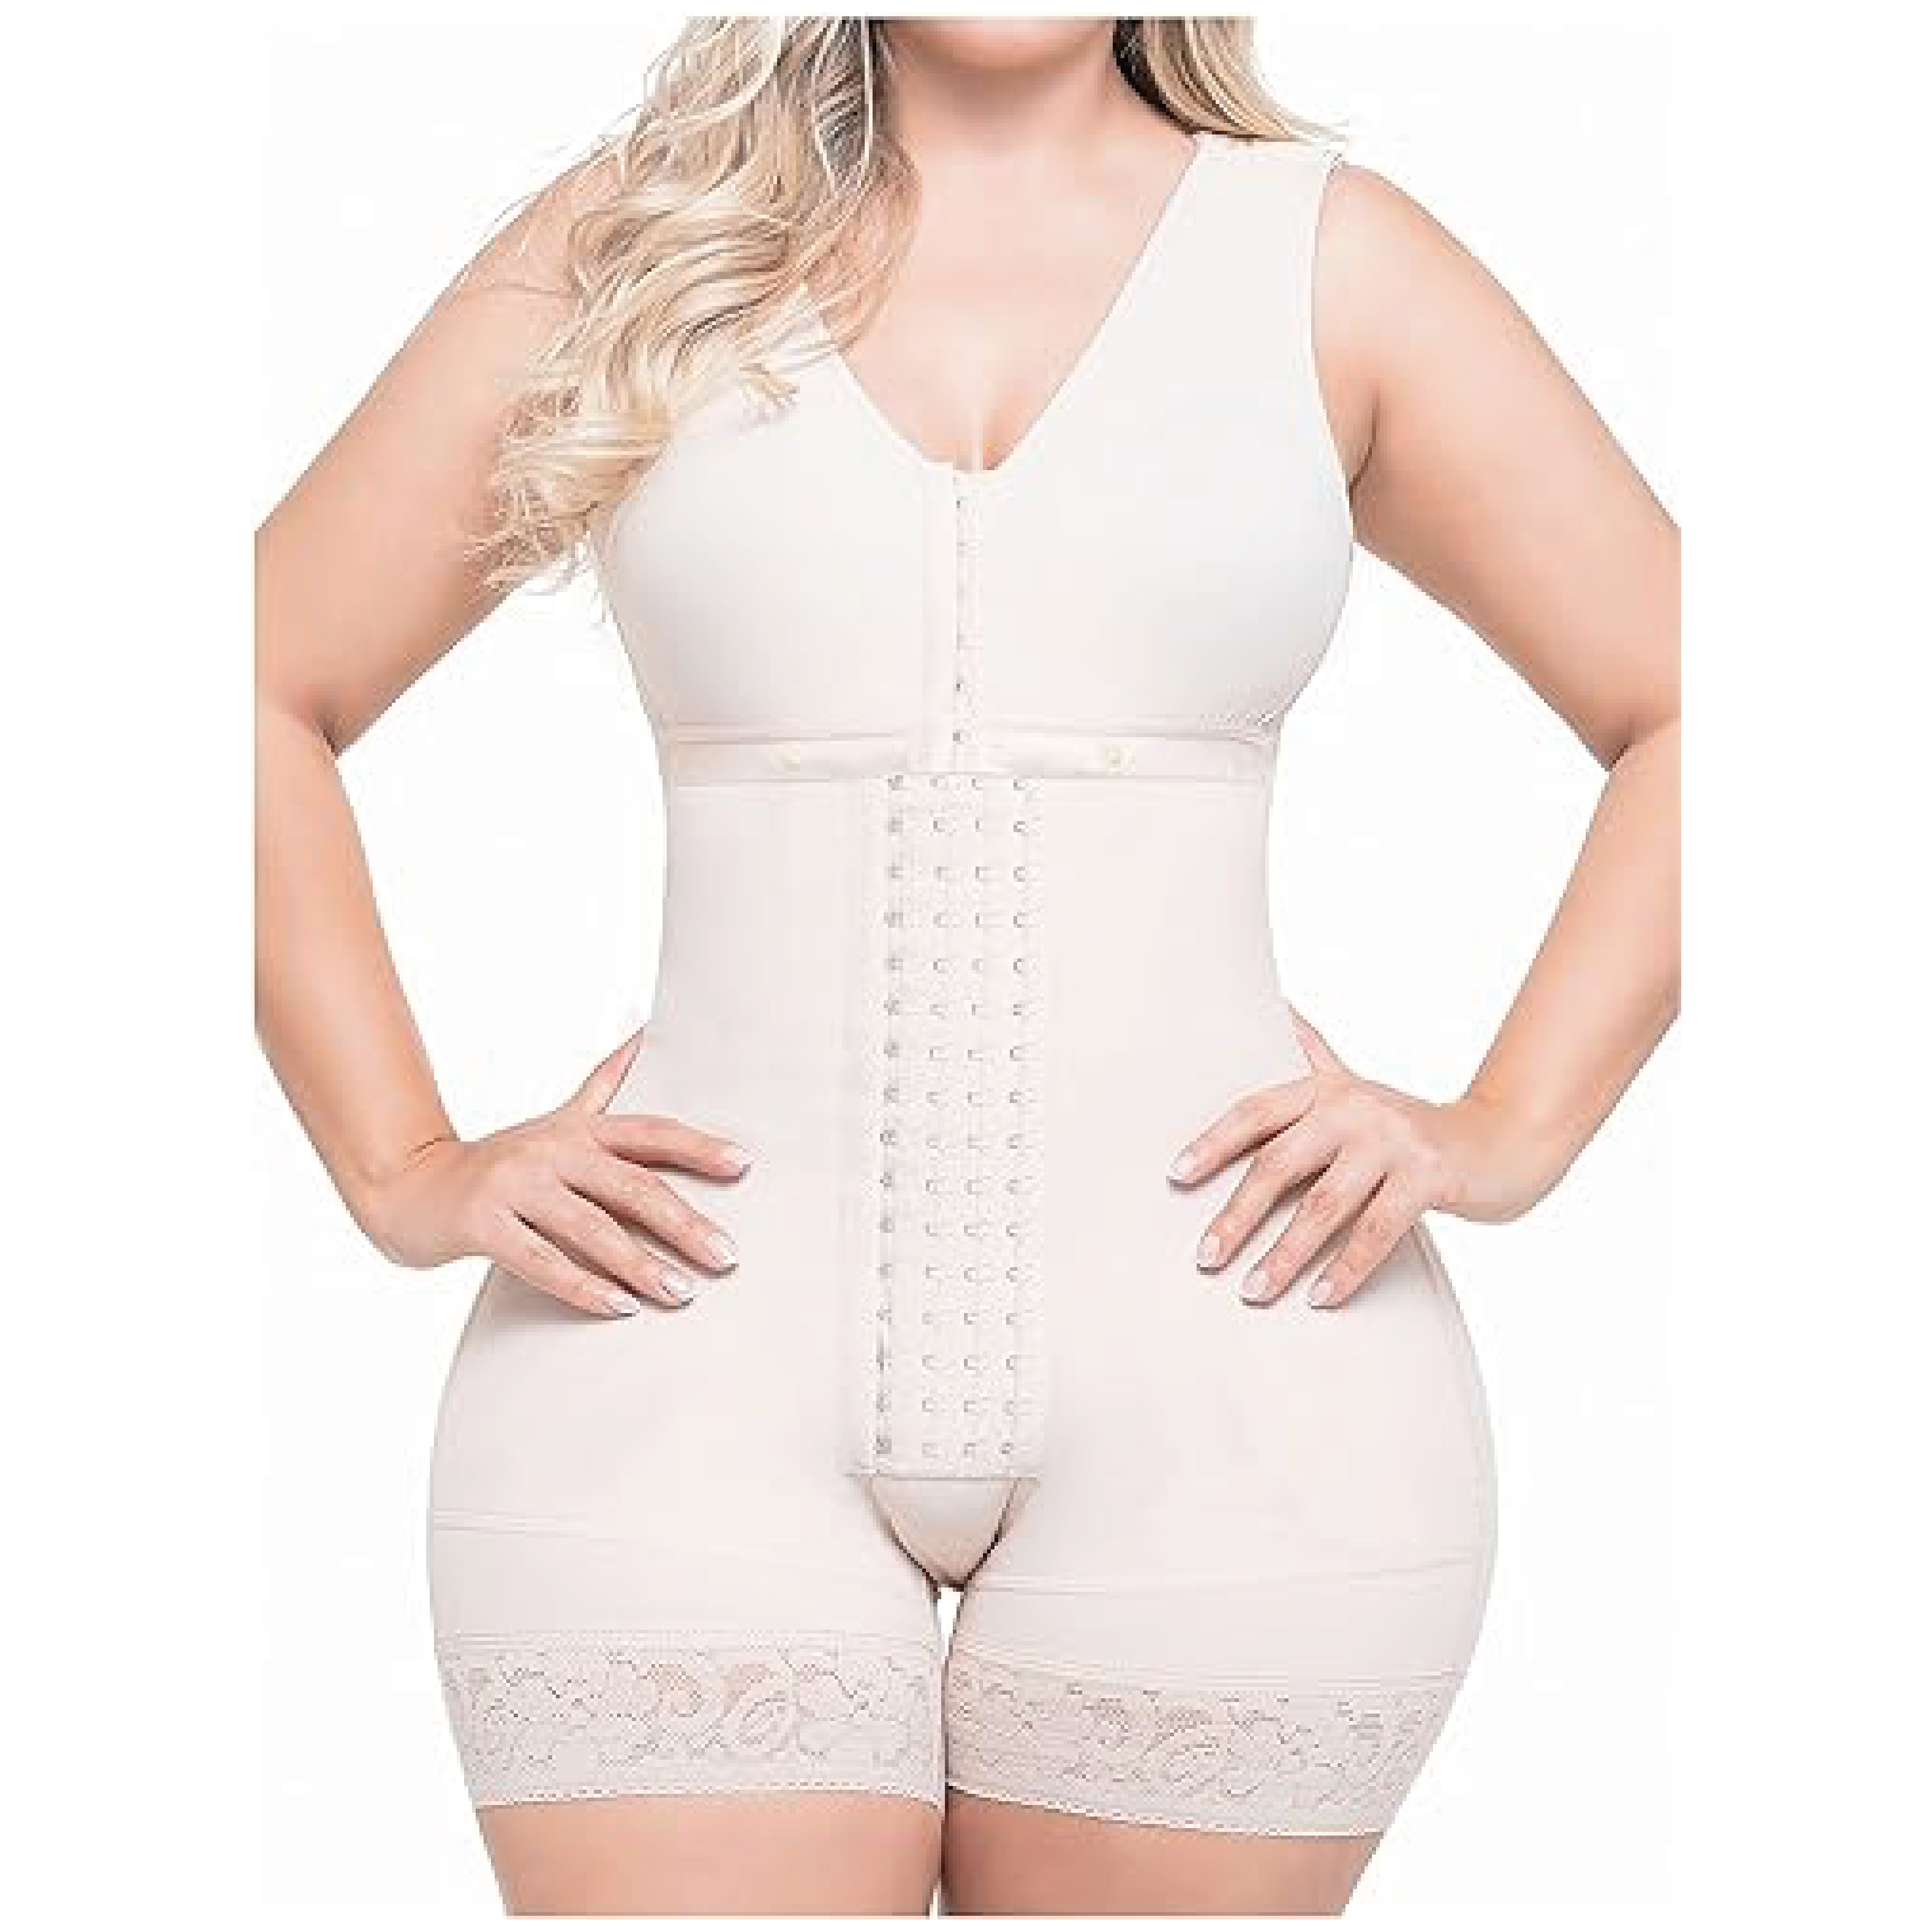 Sonryse 086 Fajas Body Slimming Shaper Bodysuit: Confidence-boosting shapewear for women, offering firm control and comfort.